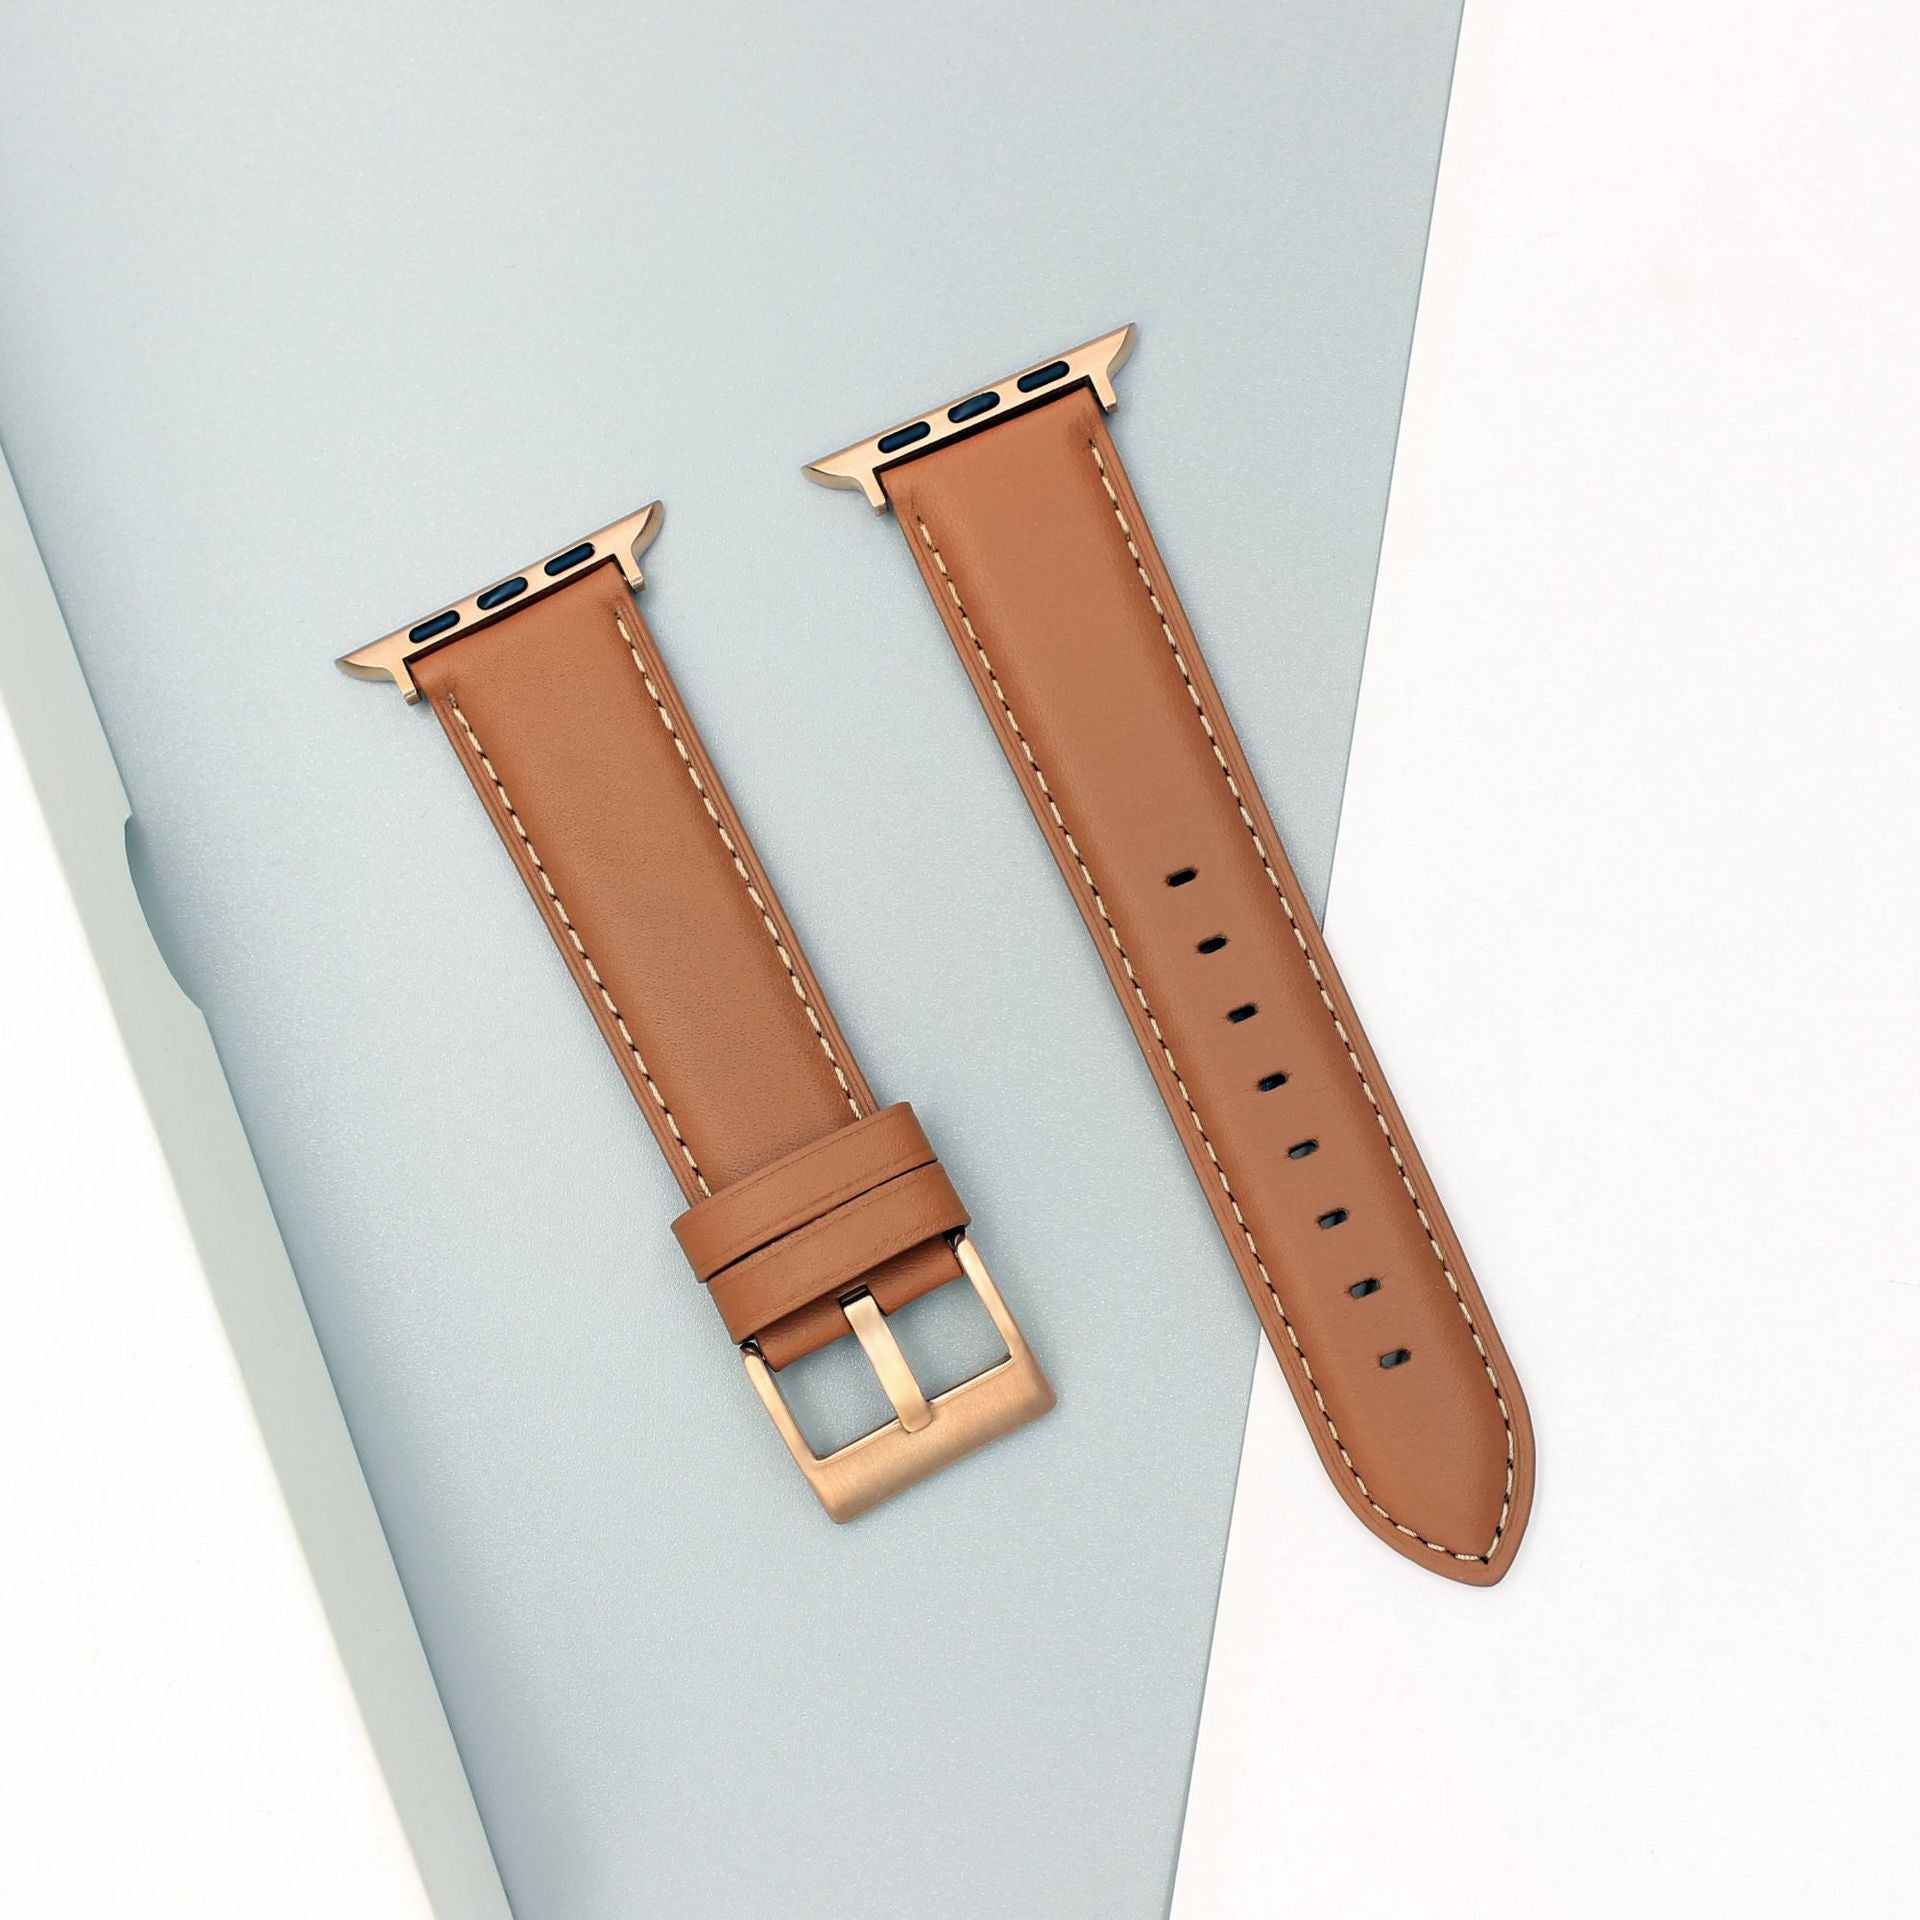 Best selling genuine leather cowhide Apple Watch strap for pets7